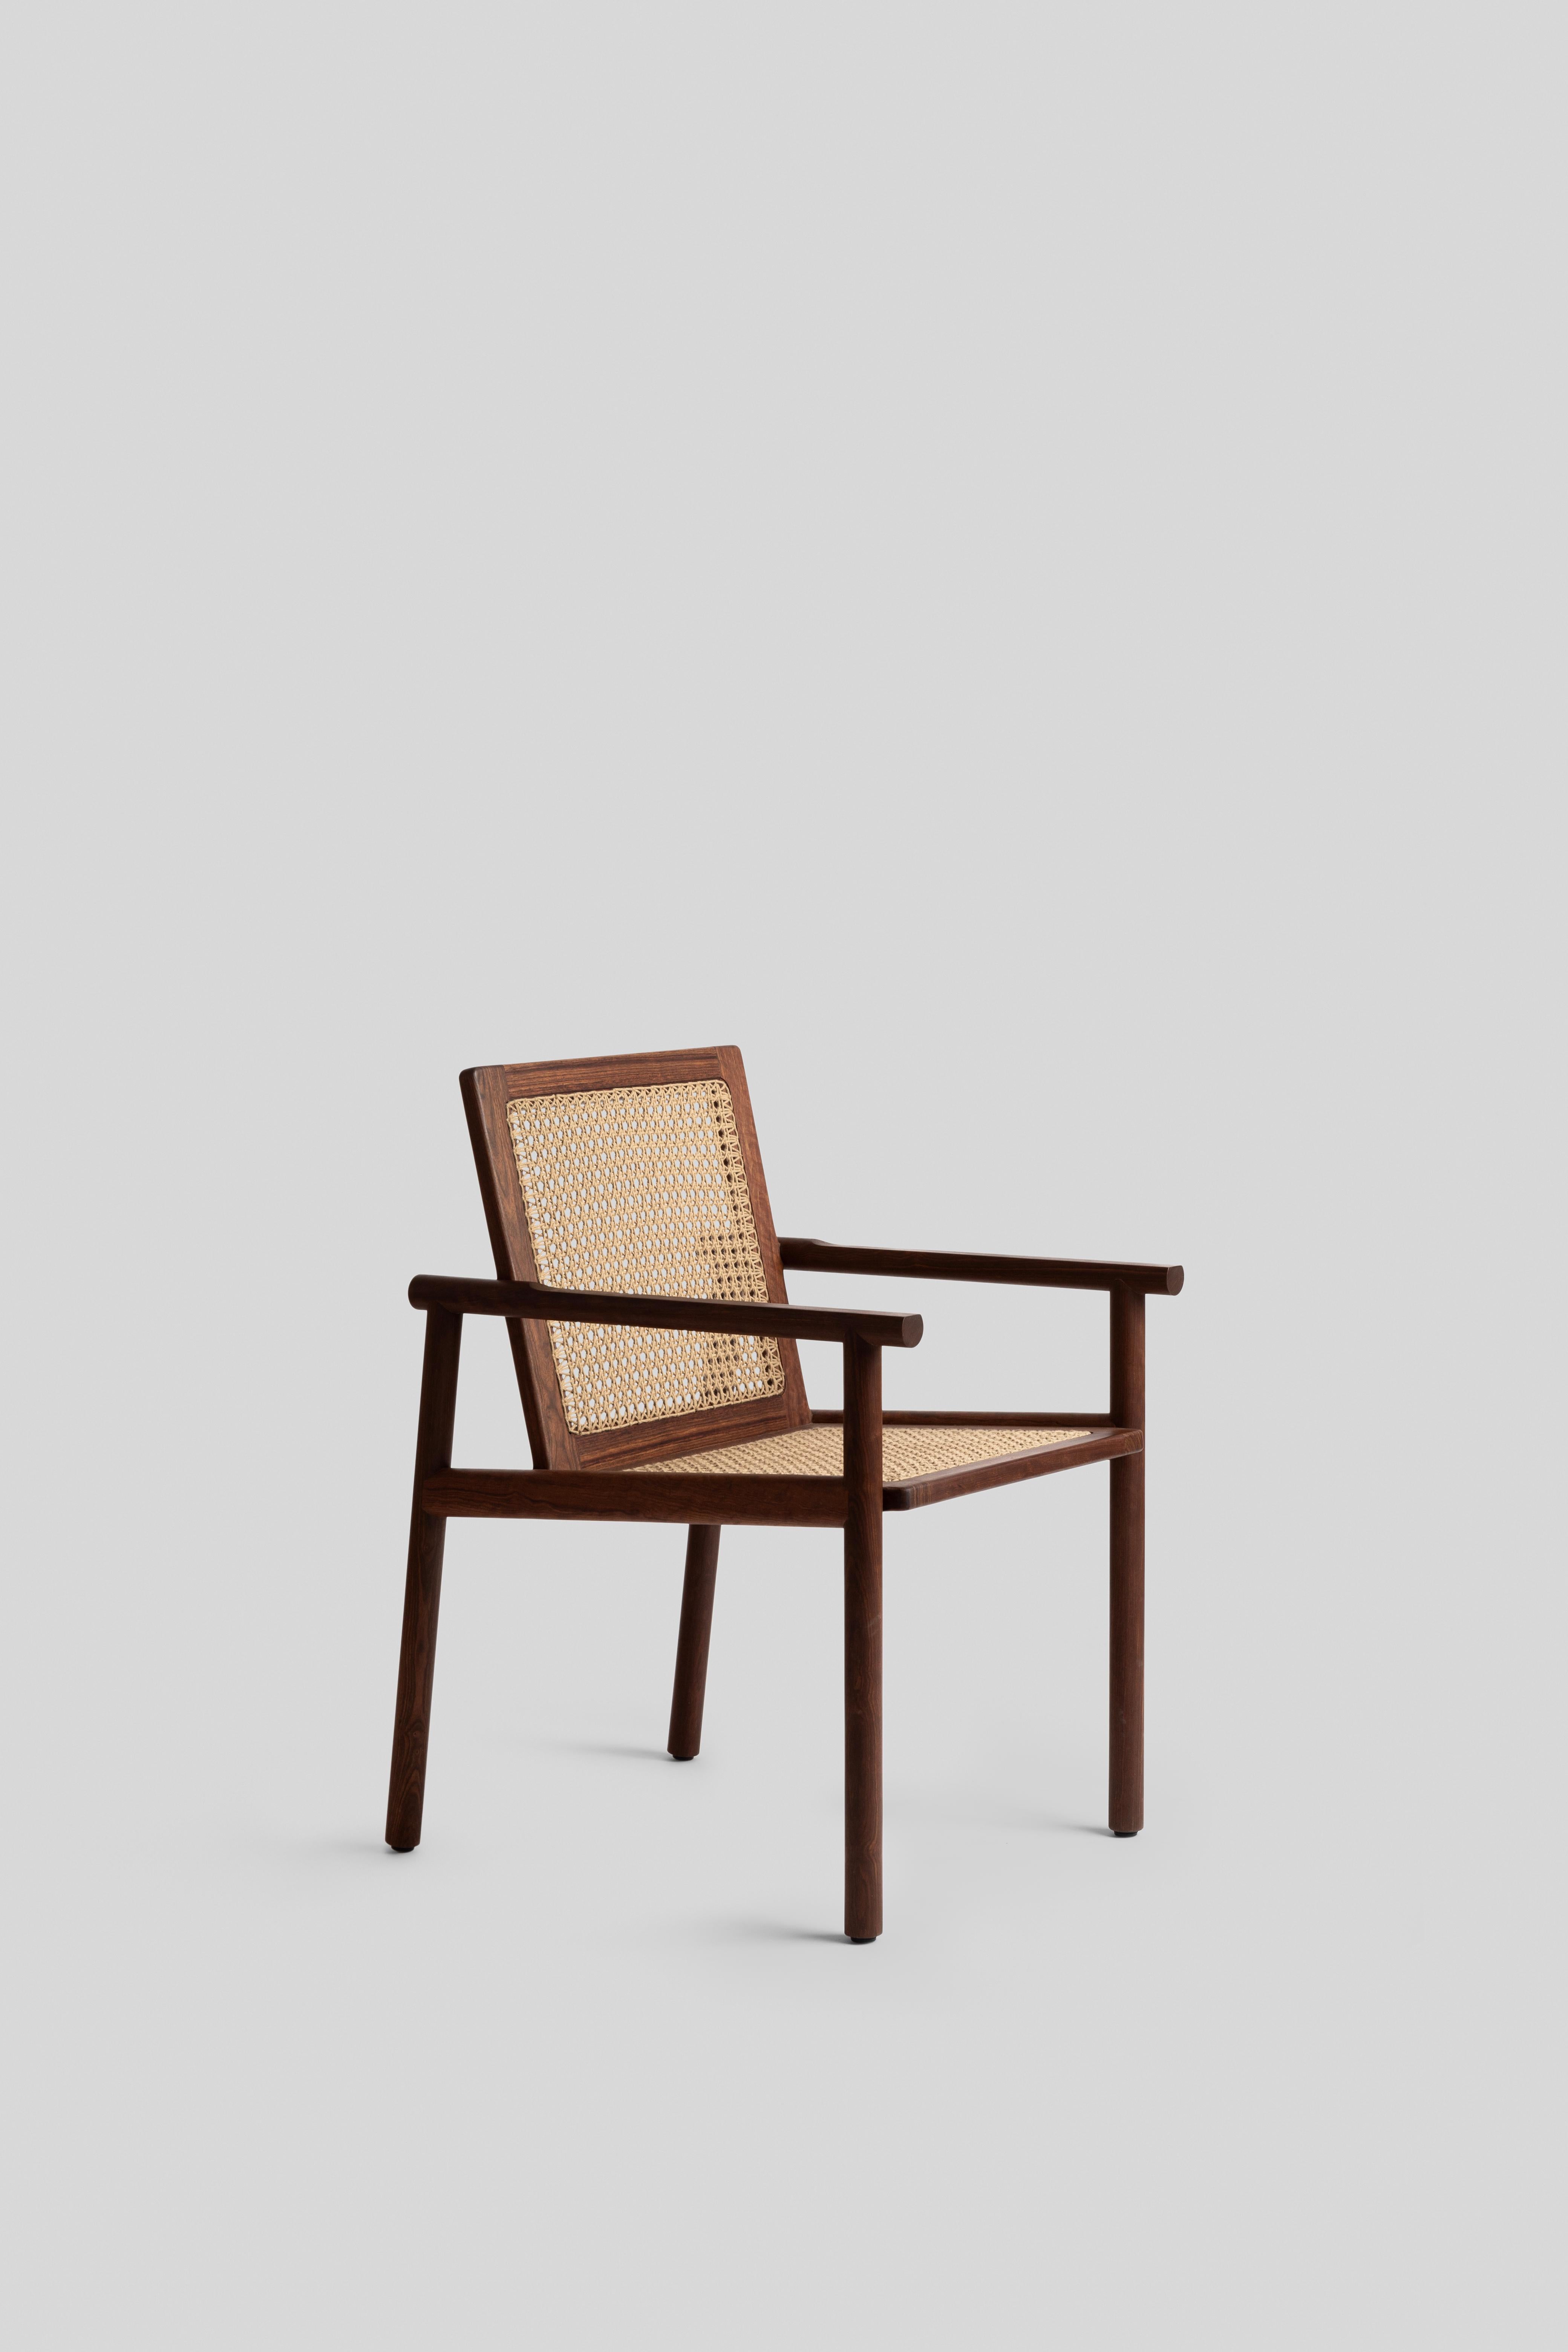 The design of the COCOM chair finds its roots in the rich tradition of wicker rockers and armchairs intricately woven in Yucatan. A testament to the fusion of tradition and modernity, this piece belongs to the esteemed COCOM collection. Each item in